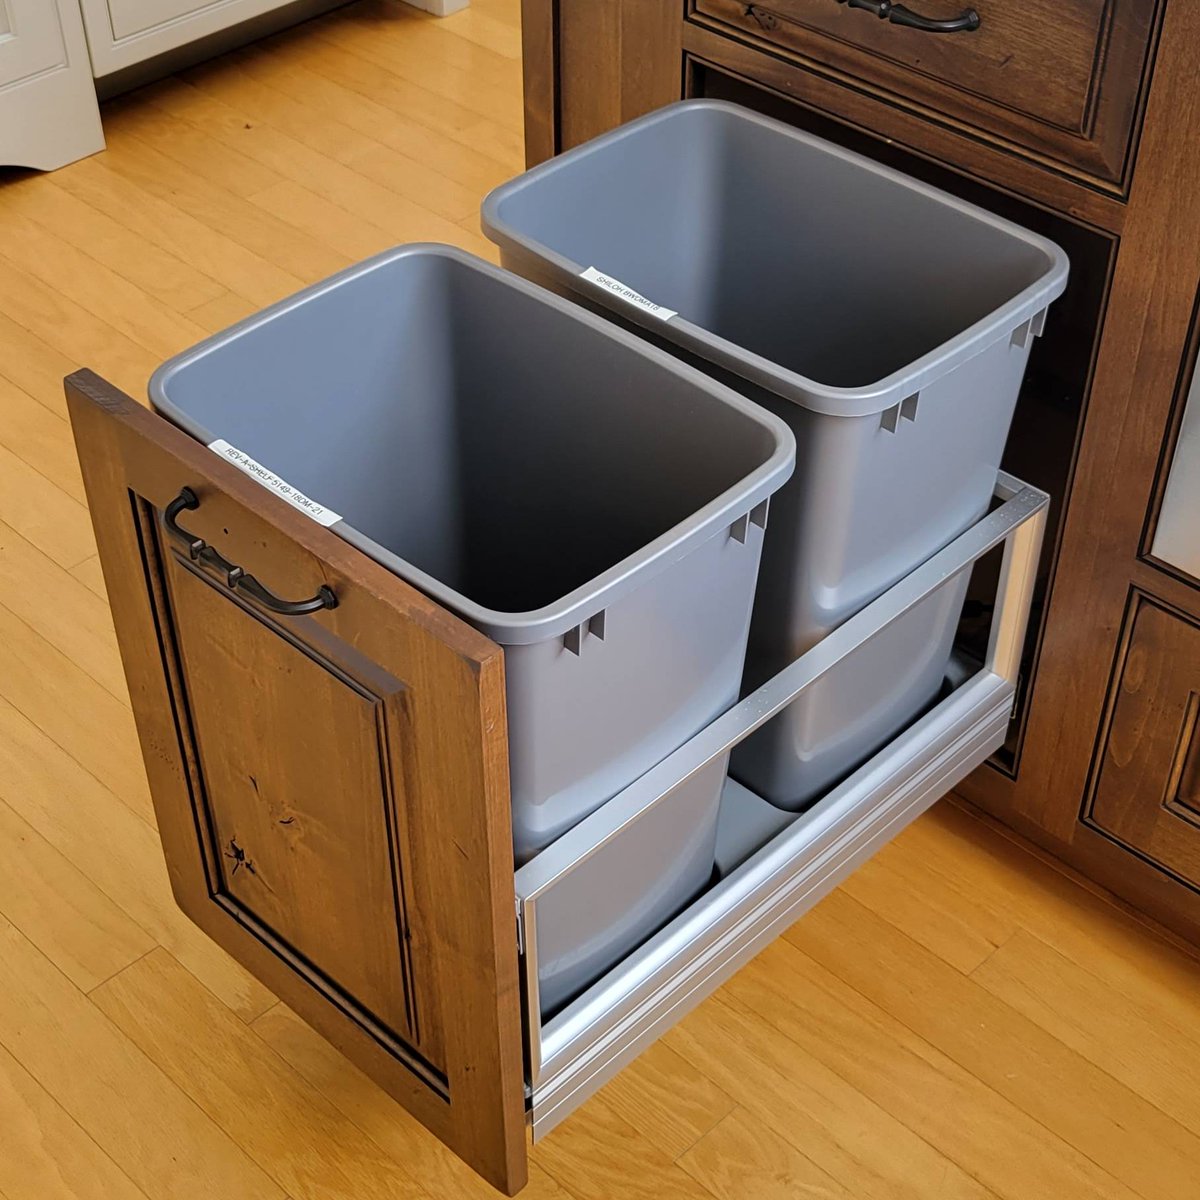 One of our most popular cabinet accessories is the double wastebasket pullout.  We design almost every kitchen with one!  

What accessory do you want in your new dream kitchen? 

#cabinetaccessories #wastebasketpullout #trashpullout #shilohcabinetry #function #recycling